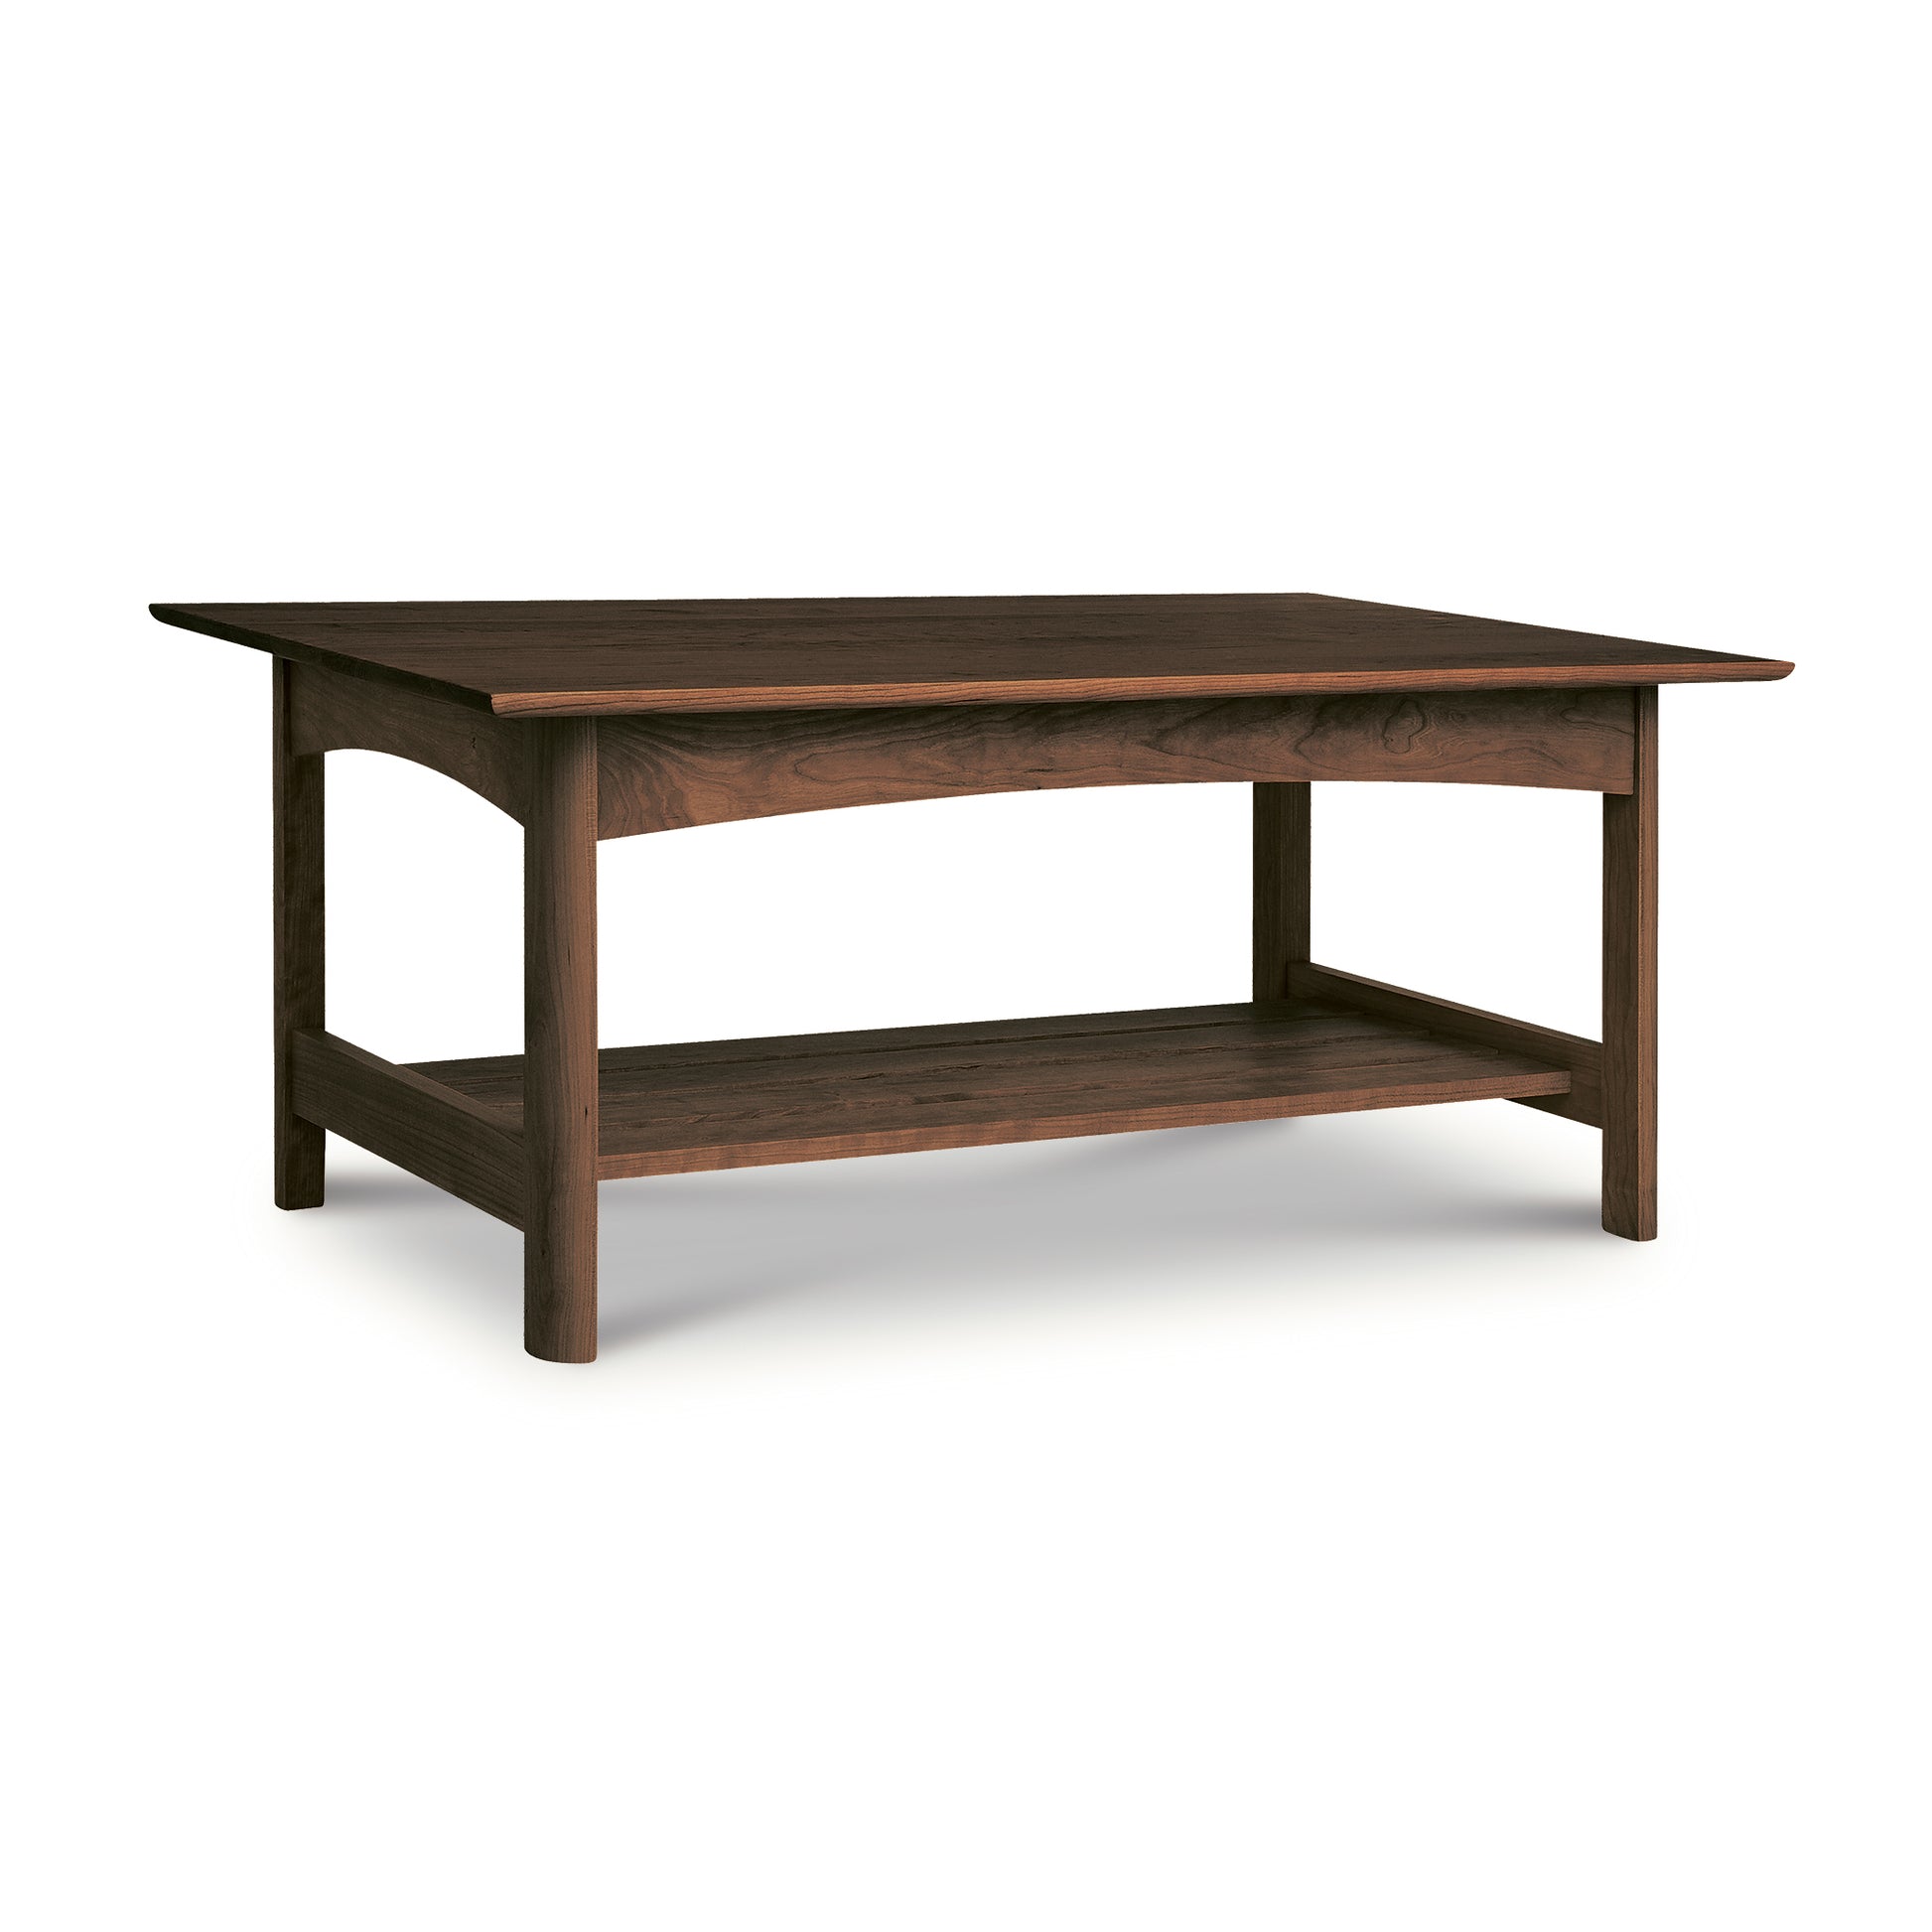 A handmade Vermont Furniture Designs Heartwood Shaker Coffee Table made of solid wood with a lower shelf, isolated on a white background.